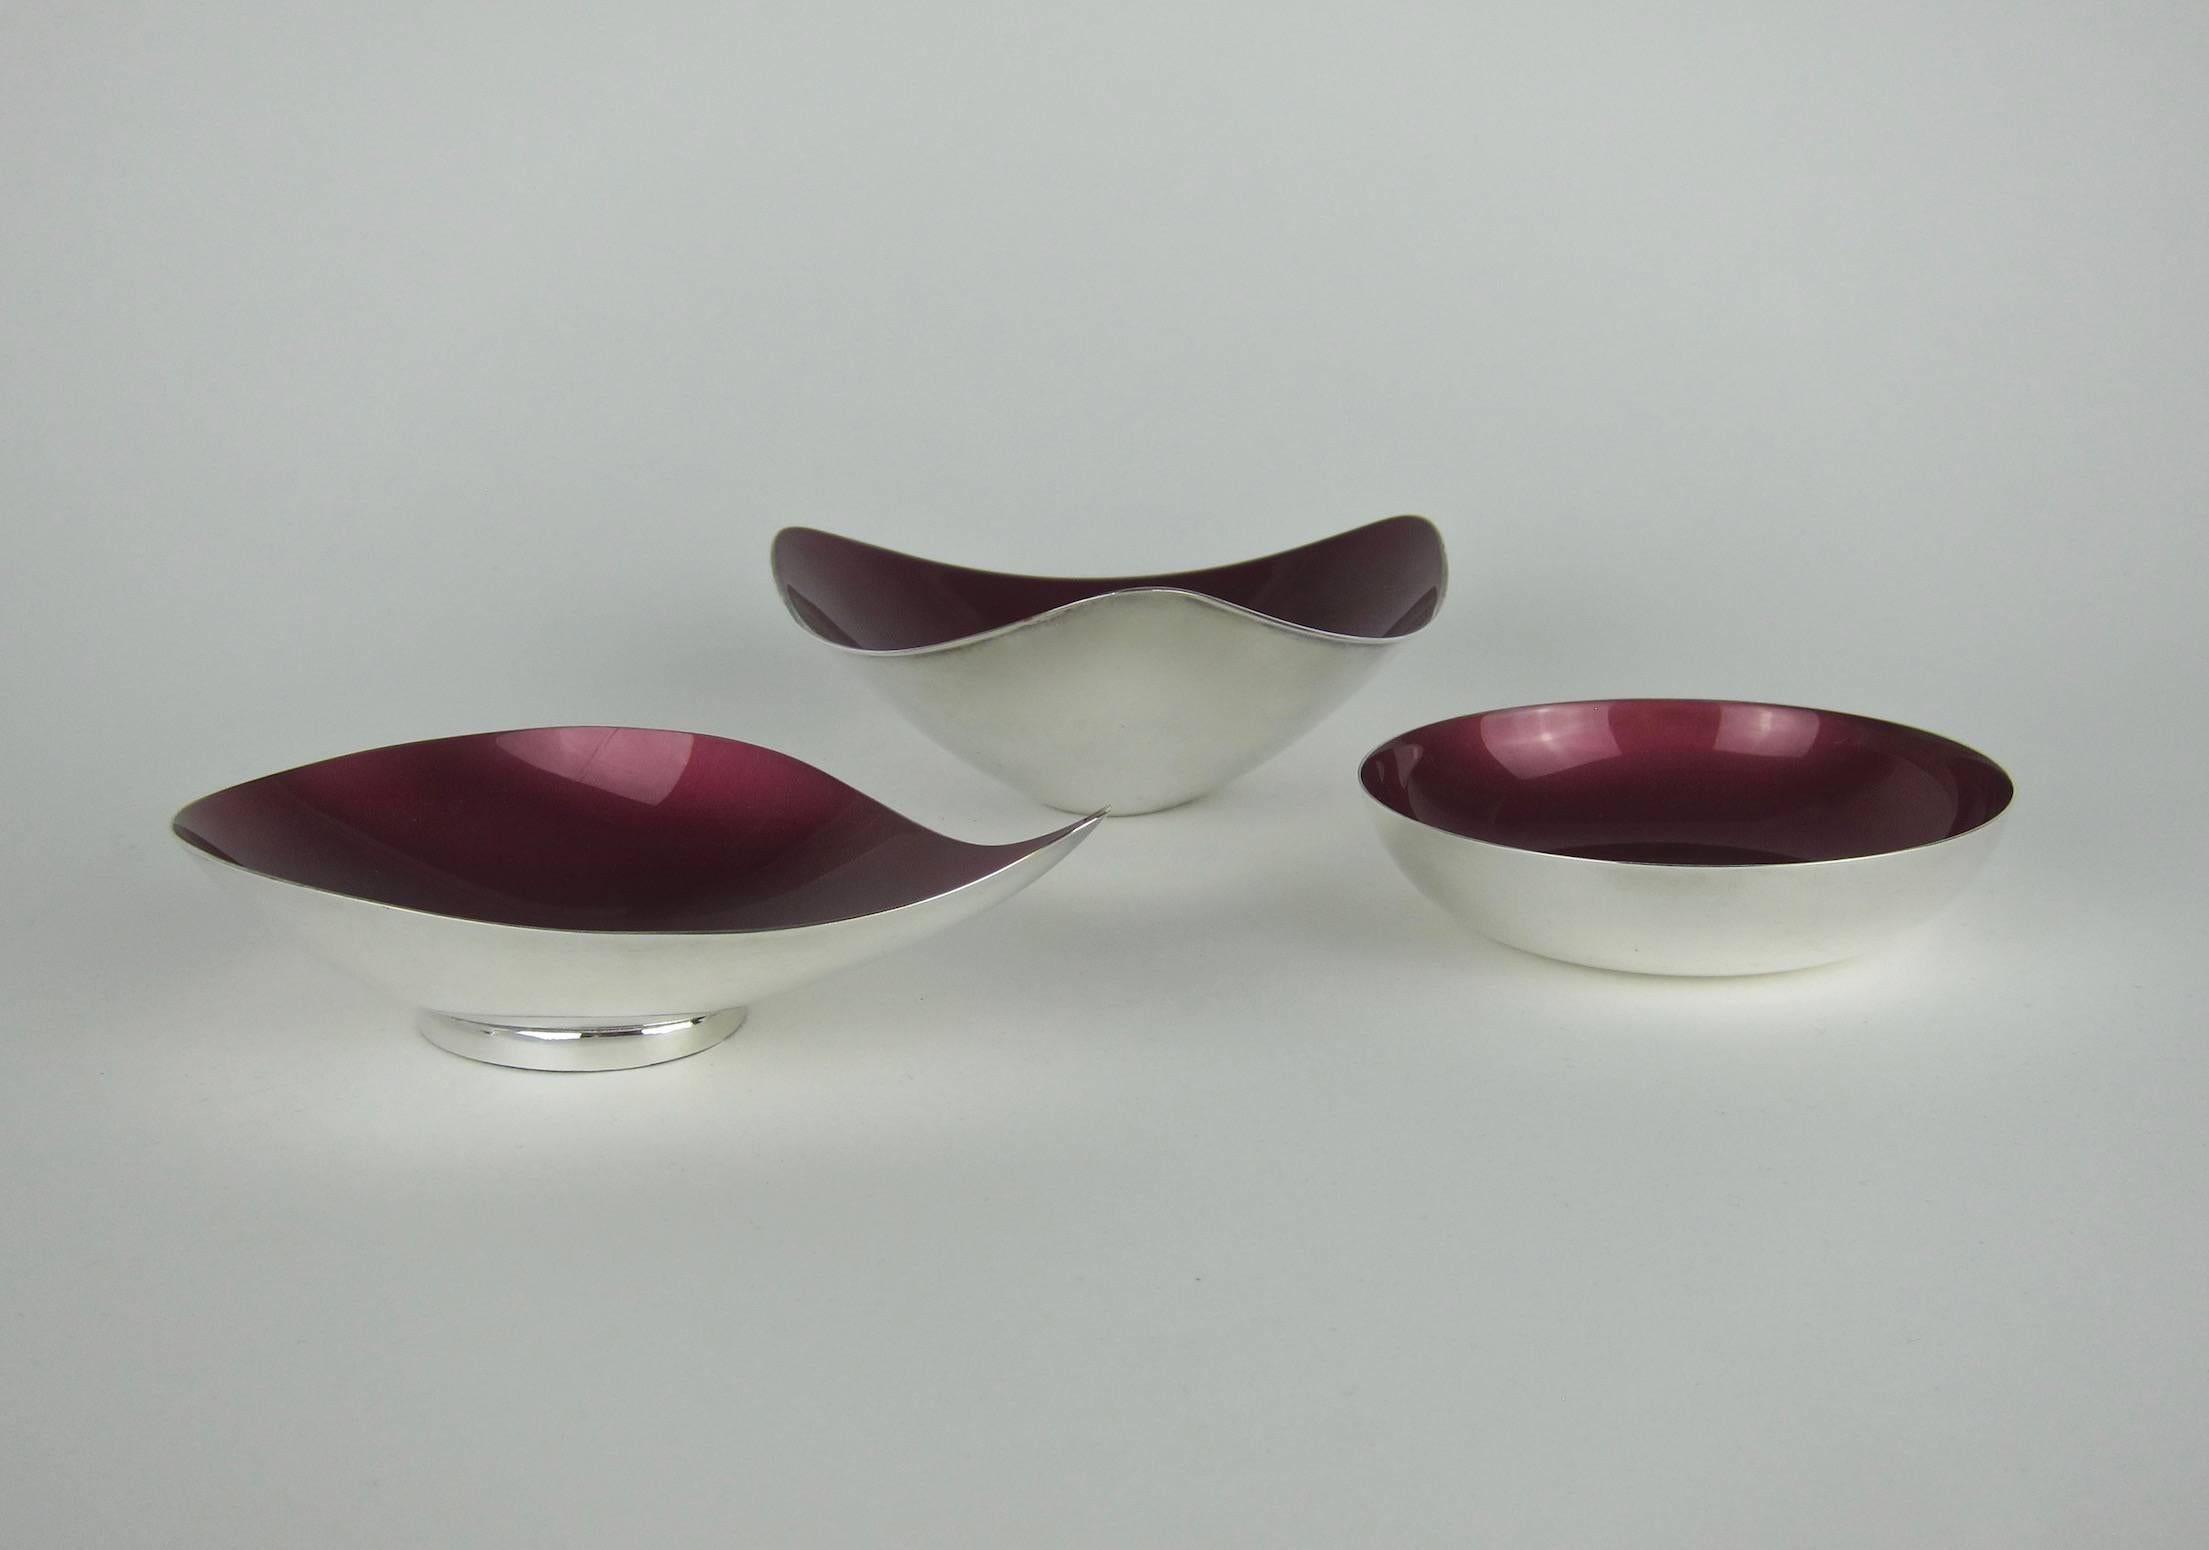 A set of three Mid-Century Modern bowls in a deep, ruby red 